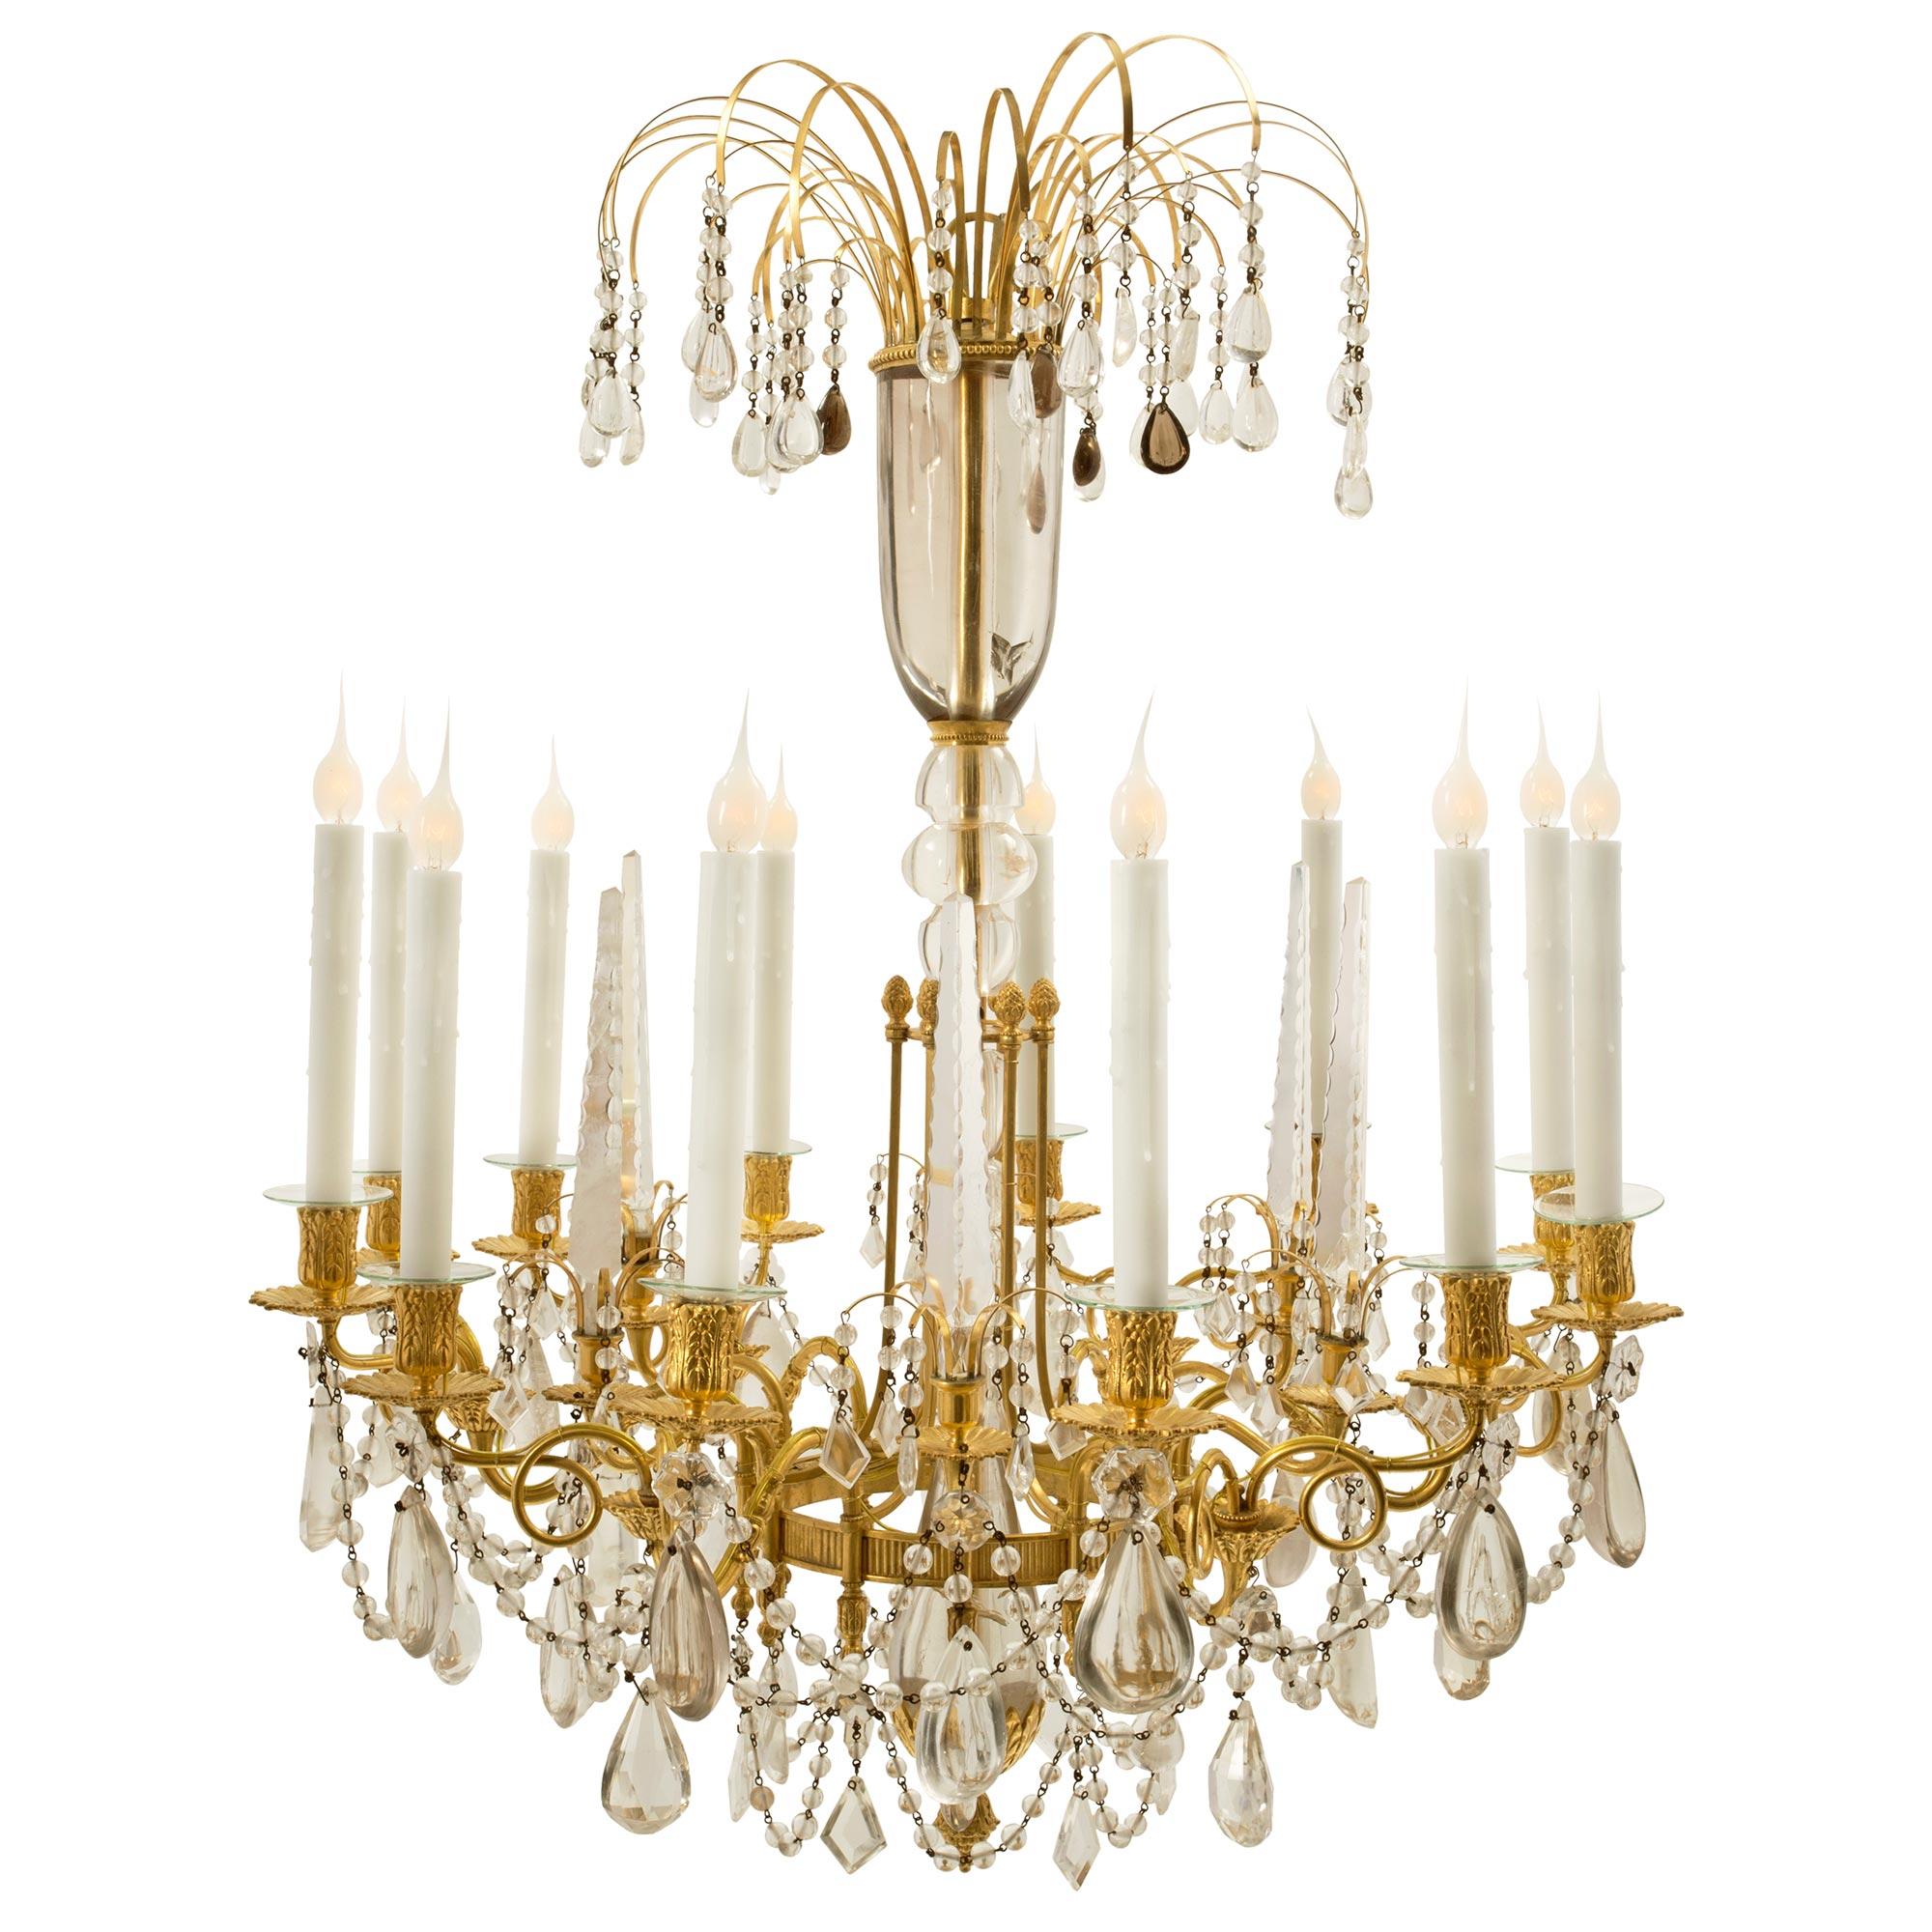 Russian Imperial 19th Century Neoclassical Style Rock Crystal Chandelier